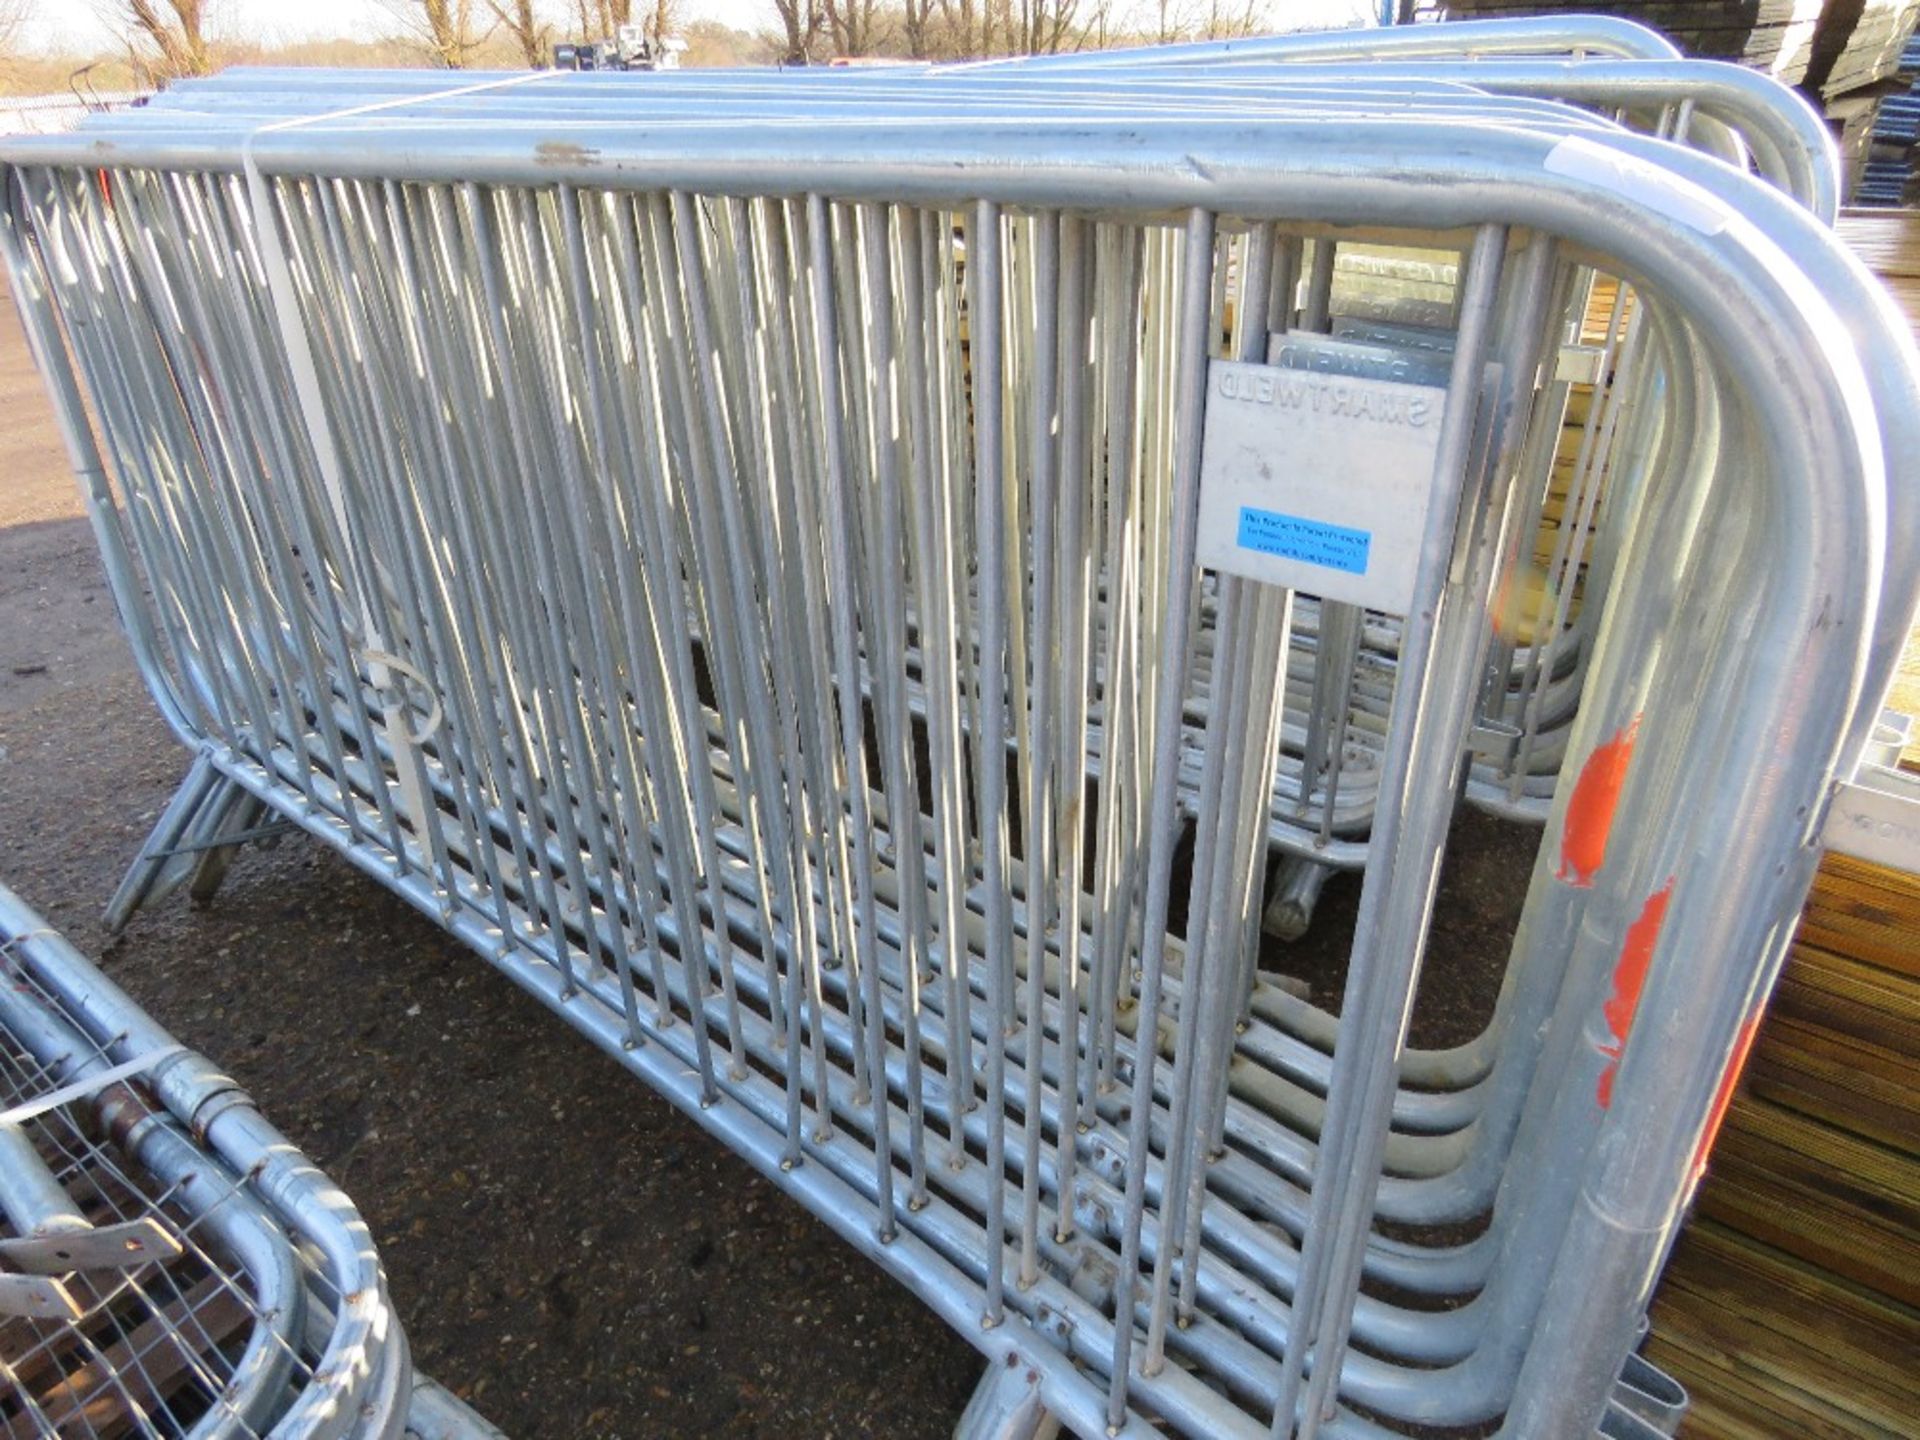 24 X STEEL PEDESTRIAN CROWD BARRIERS This items is being item sold under AMS…no vat will be on - Image 2 of 5